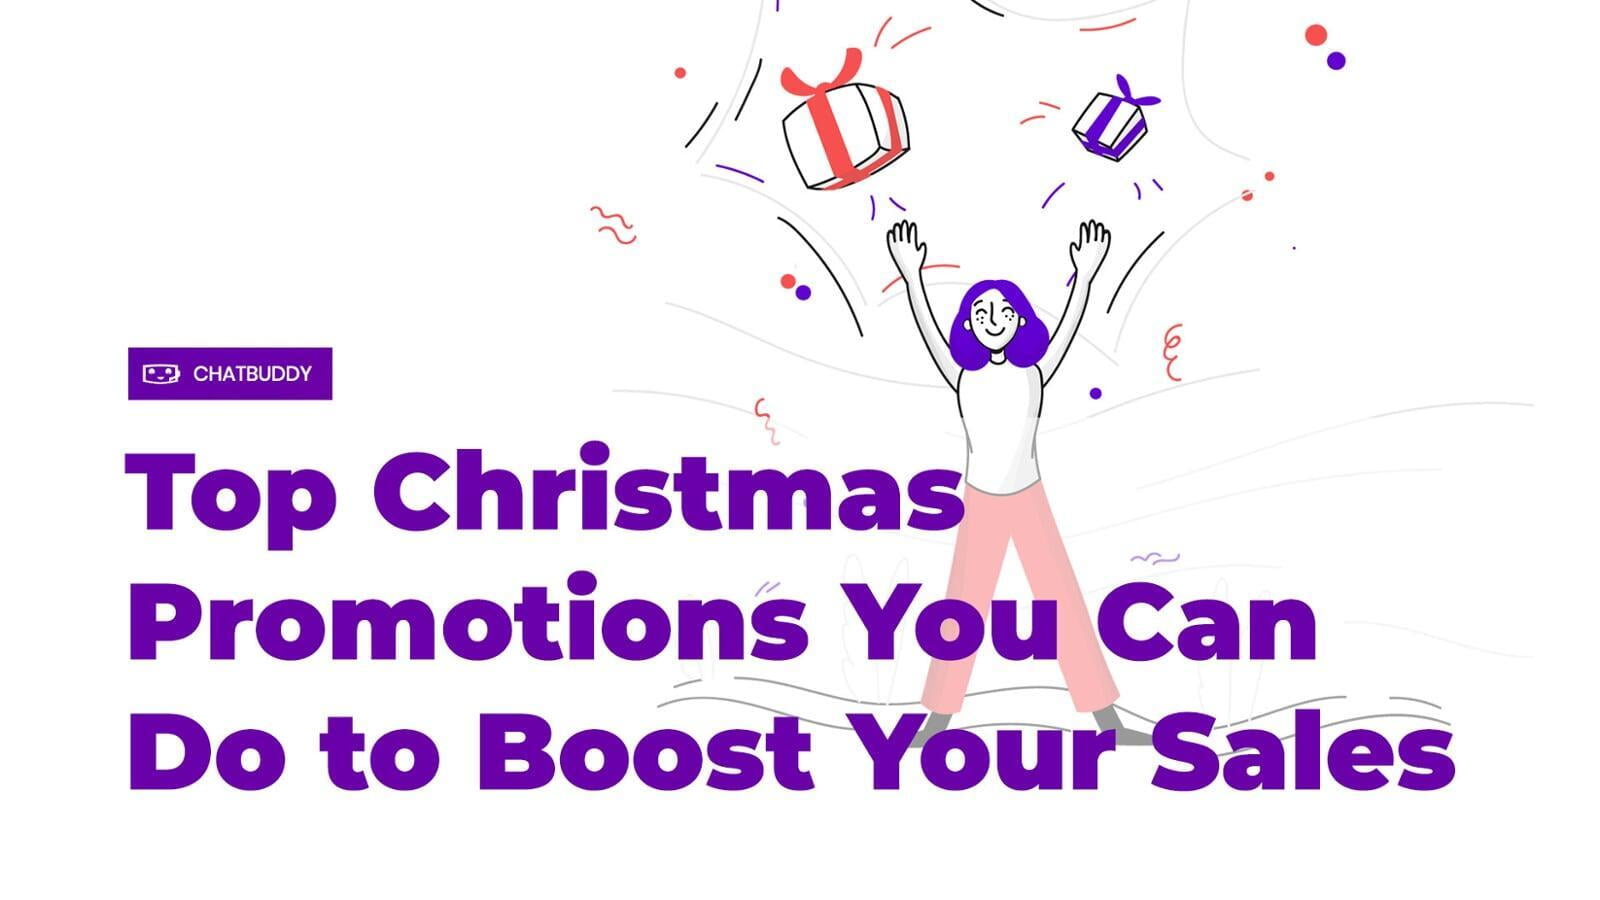 Top Christmas Promotions You Can Do to Boost Your Sales